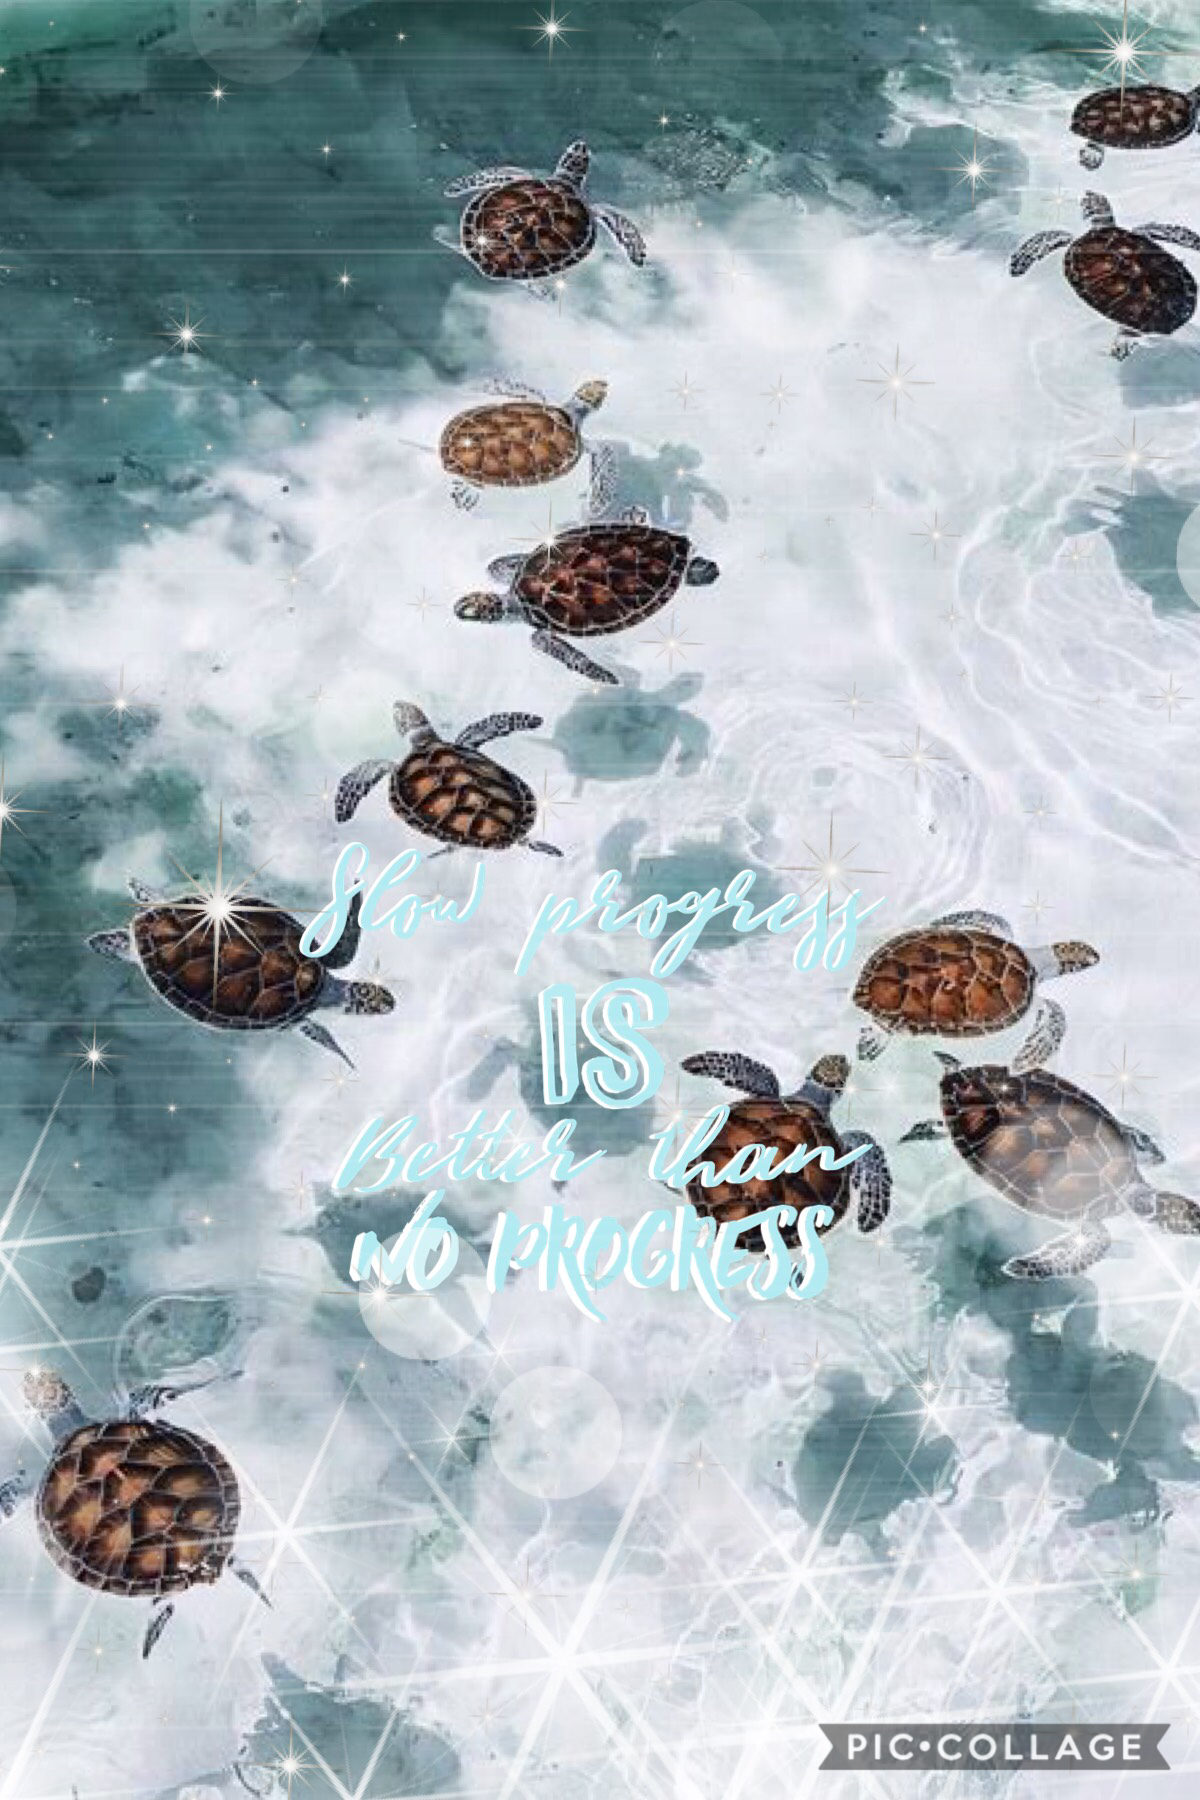 💙3/5/2021💙
I love sea turtles!
What is your favorite kind of turtle?